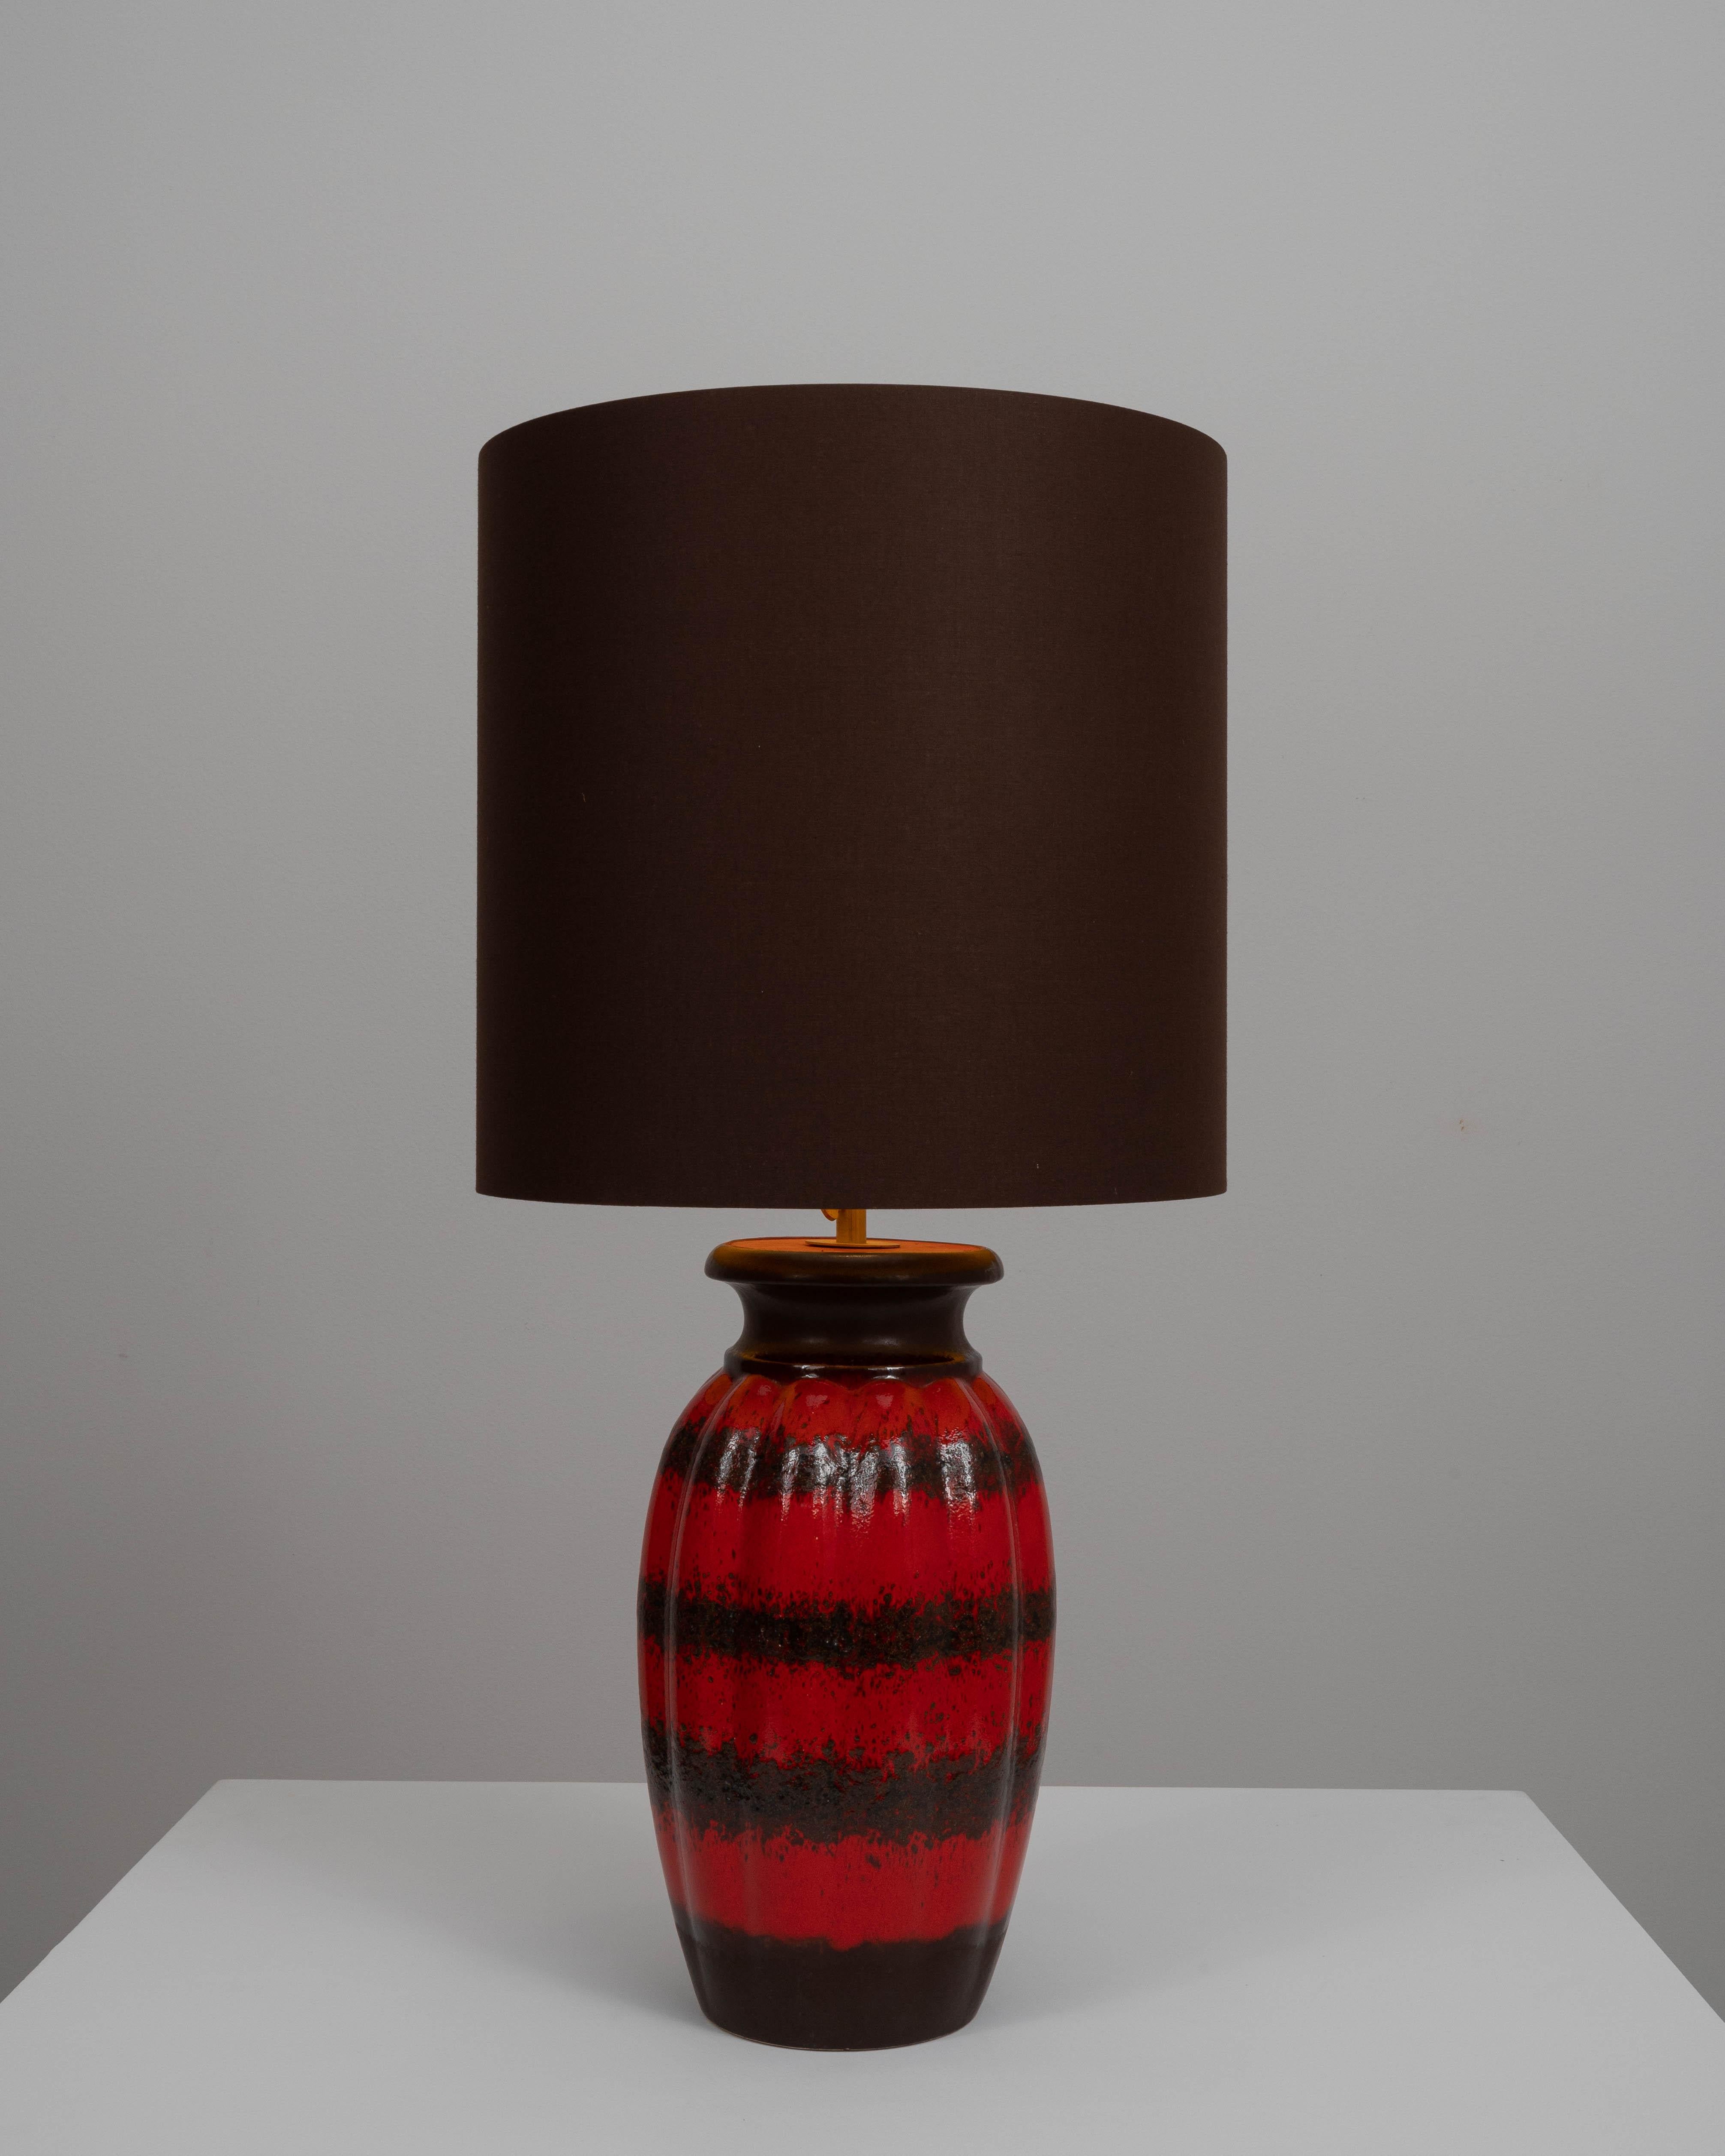 This 20th Century German Ceramic Table Lamp exemplifies the bold and expressive design sensibilities that characterized the era. The lamp's base is a vessel of vibrant artistry, with a rich, crimson glaze that drips over a glossy black ceramic